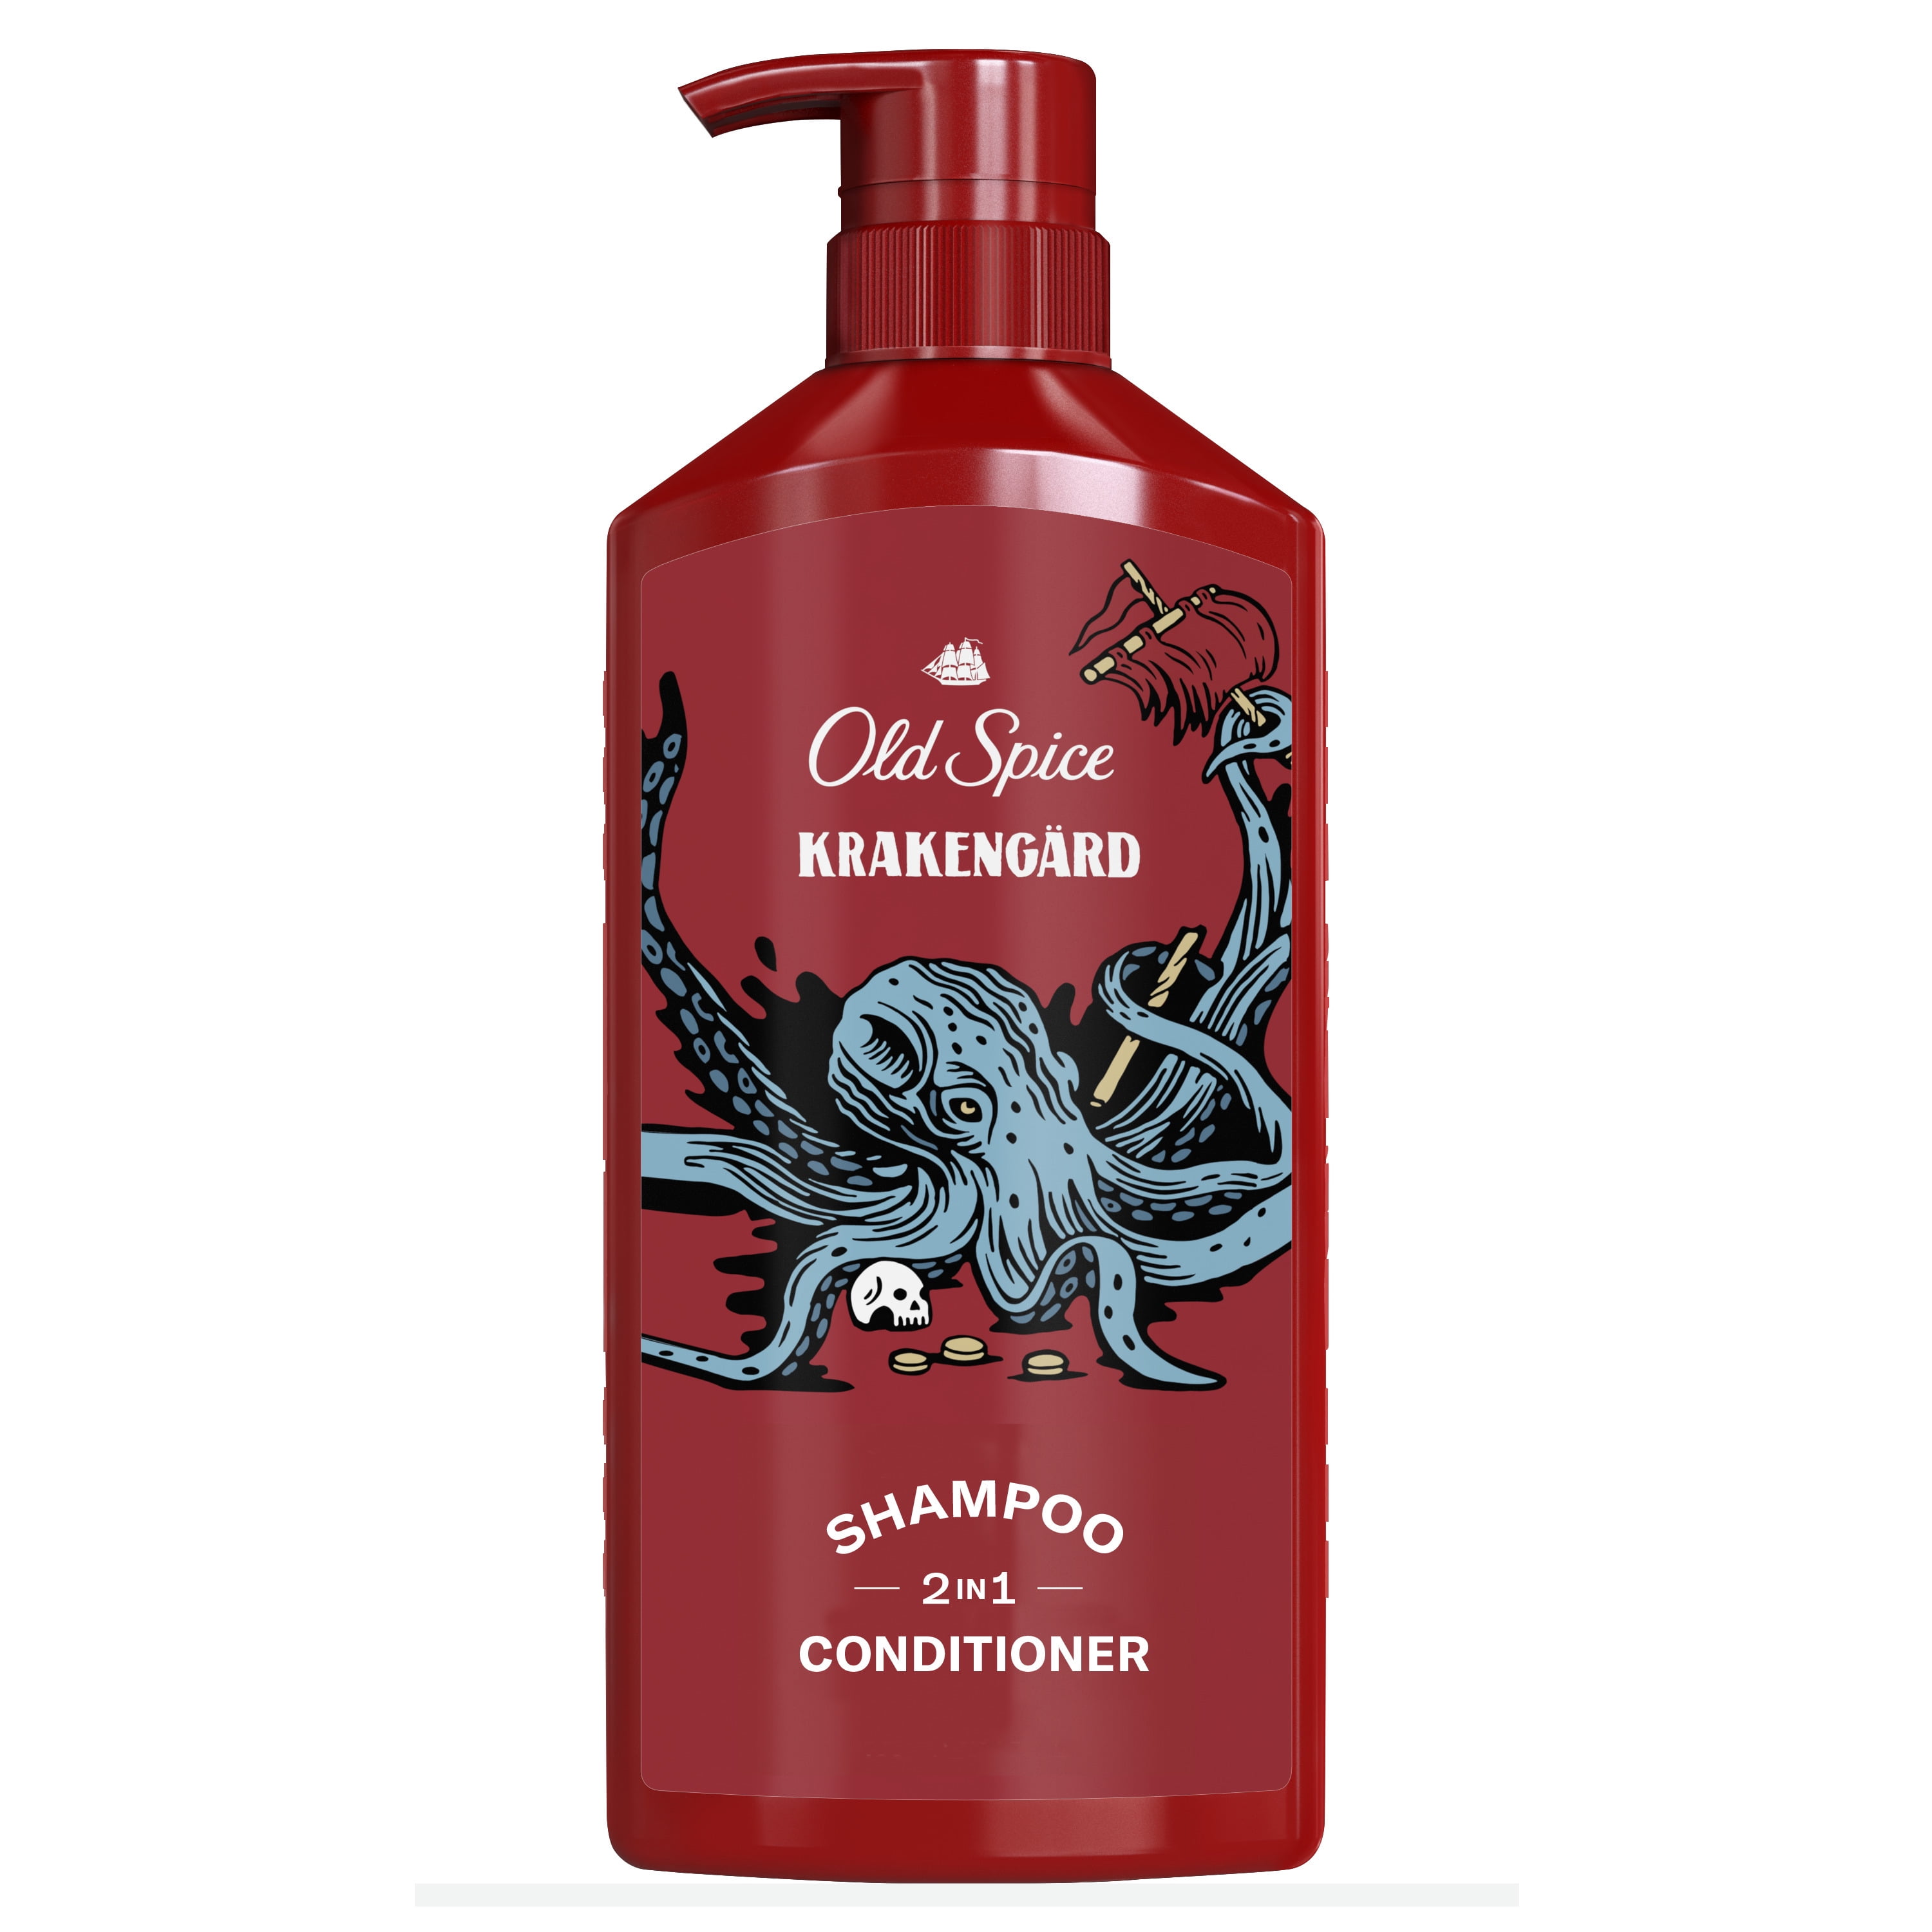 Old Spice 2in1 Mens Shampoo and Conditioner, Krakengard, 22 fl oz